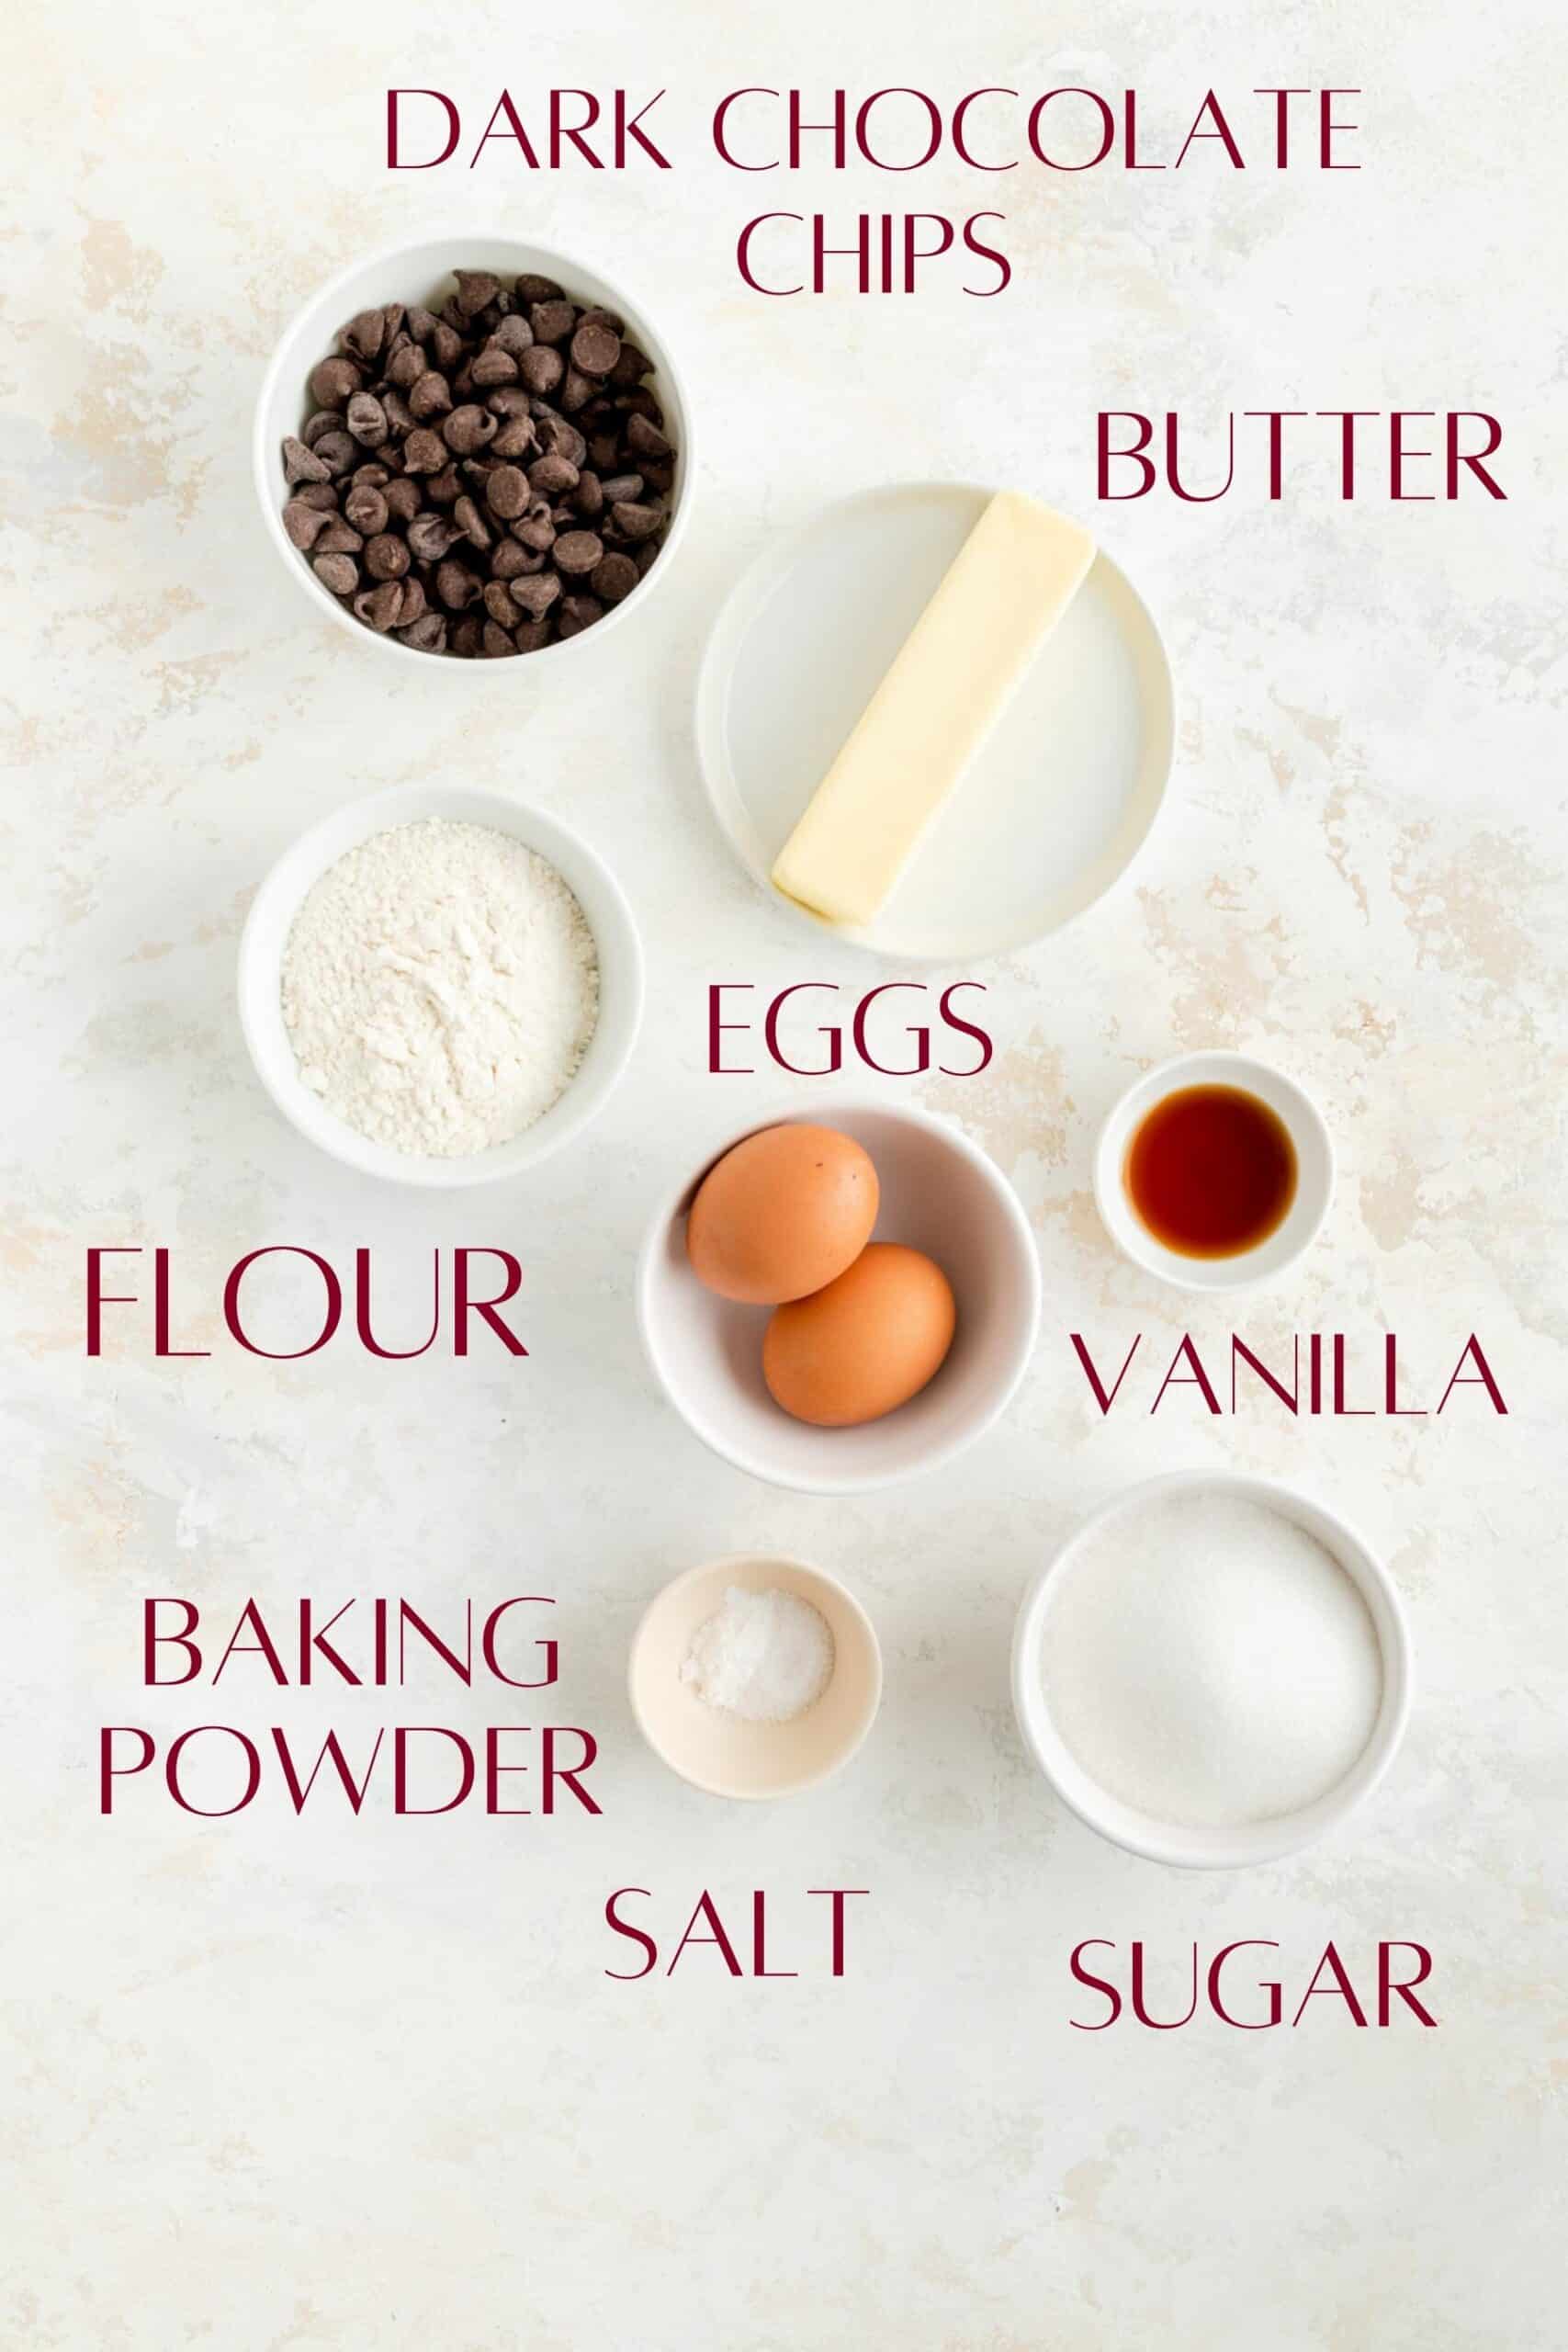 labeled brownie batter ingredients in individual bowls on a white background.